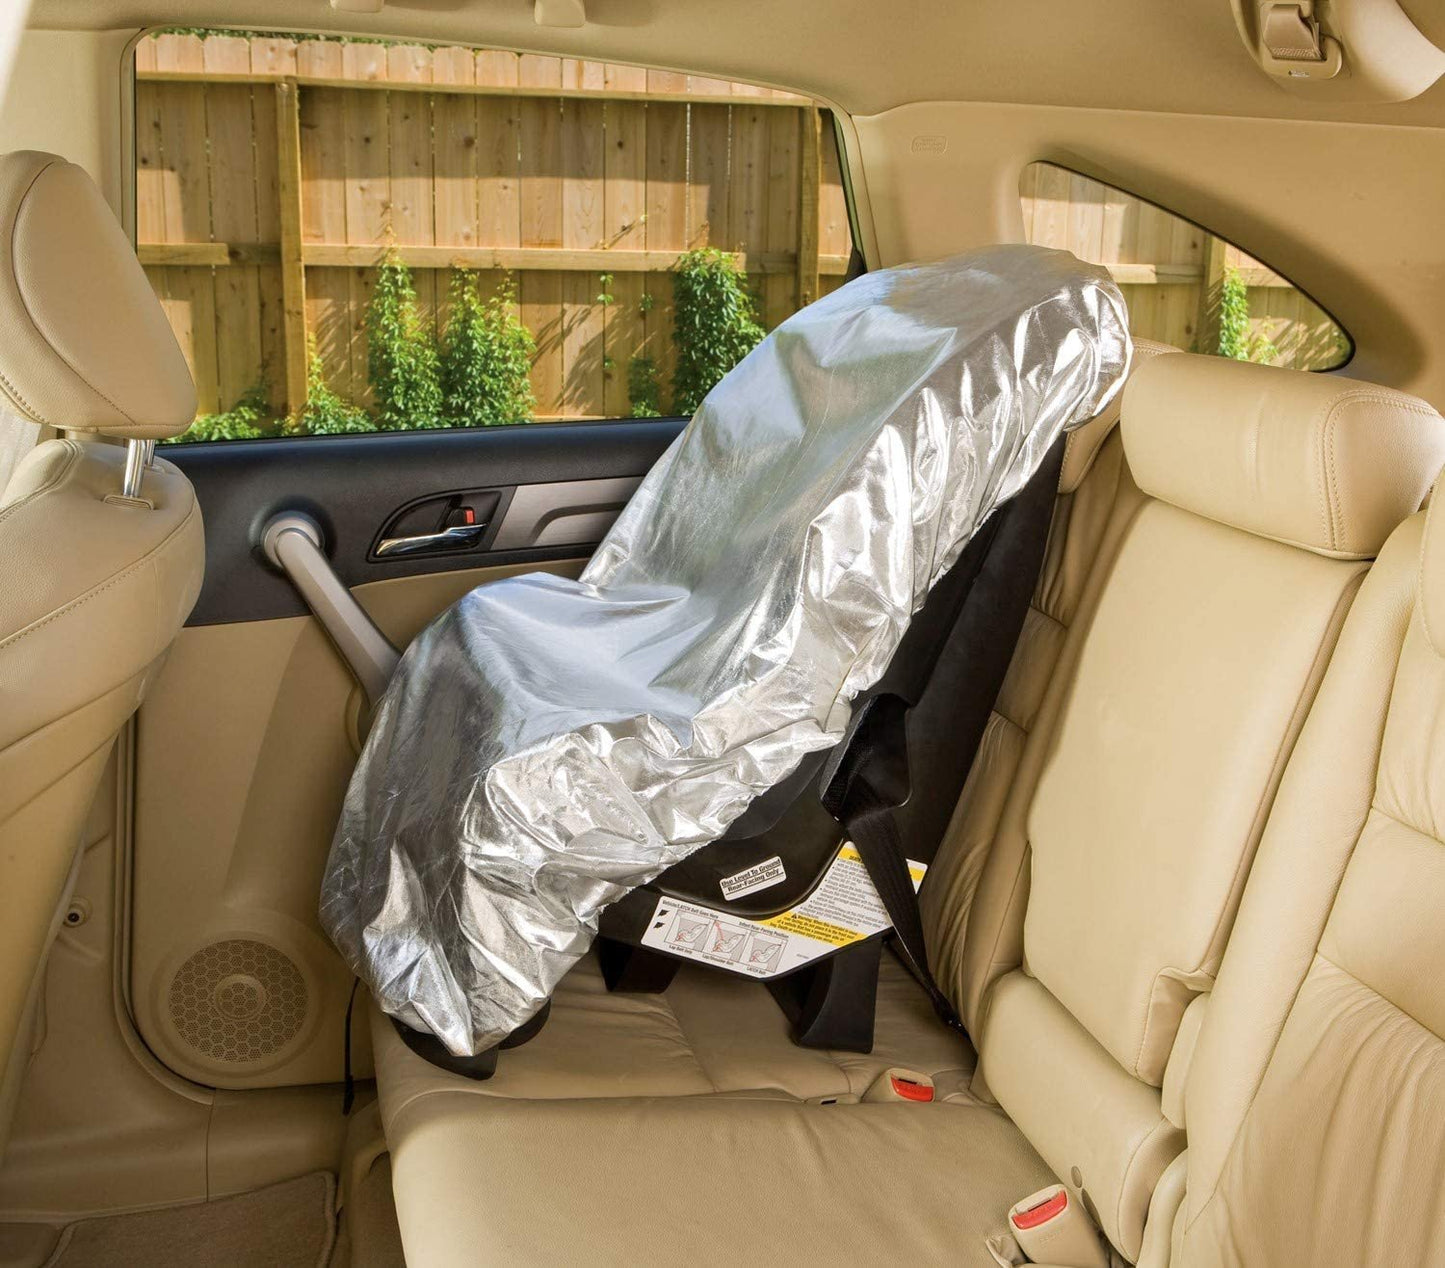 Car Seat Sun Shade Cover - Keep Your Baby's Carseat at a Cooler Temperature - Covers and Blocks Out Heat & Sun - More Comfortable for Baby or Child - Protection from UV Sunlight - Mommy's Helper